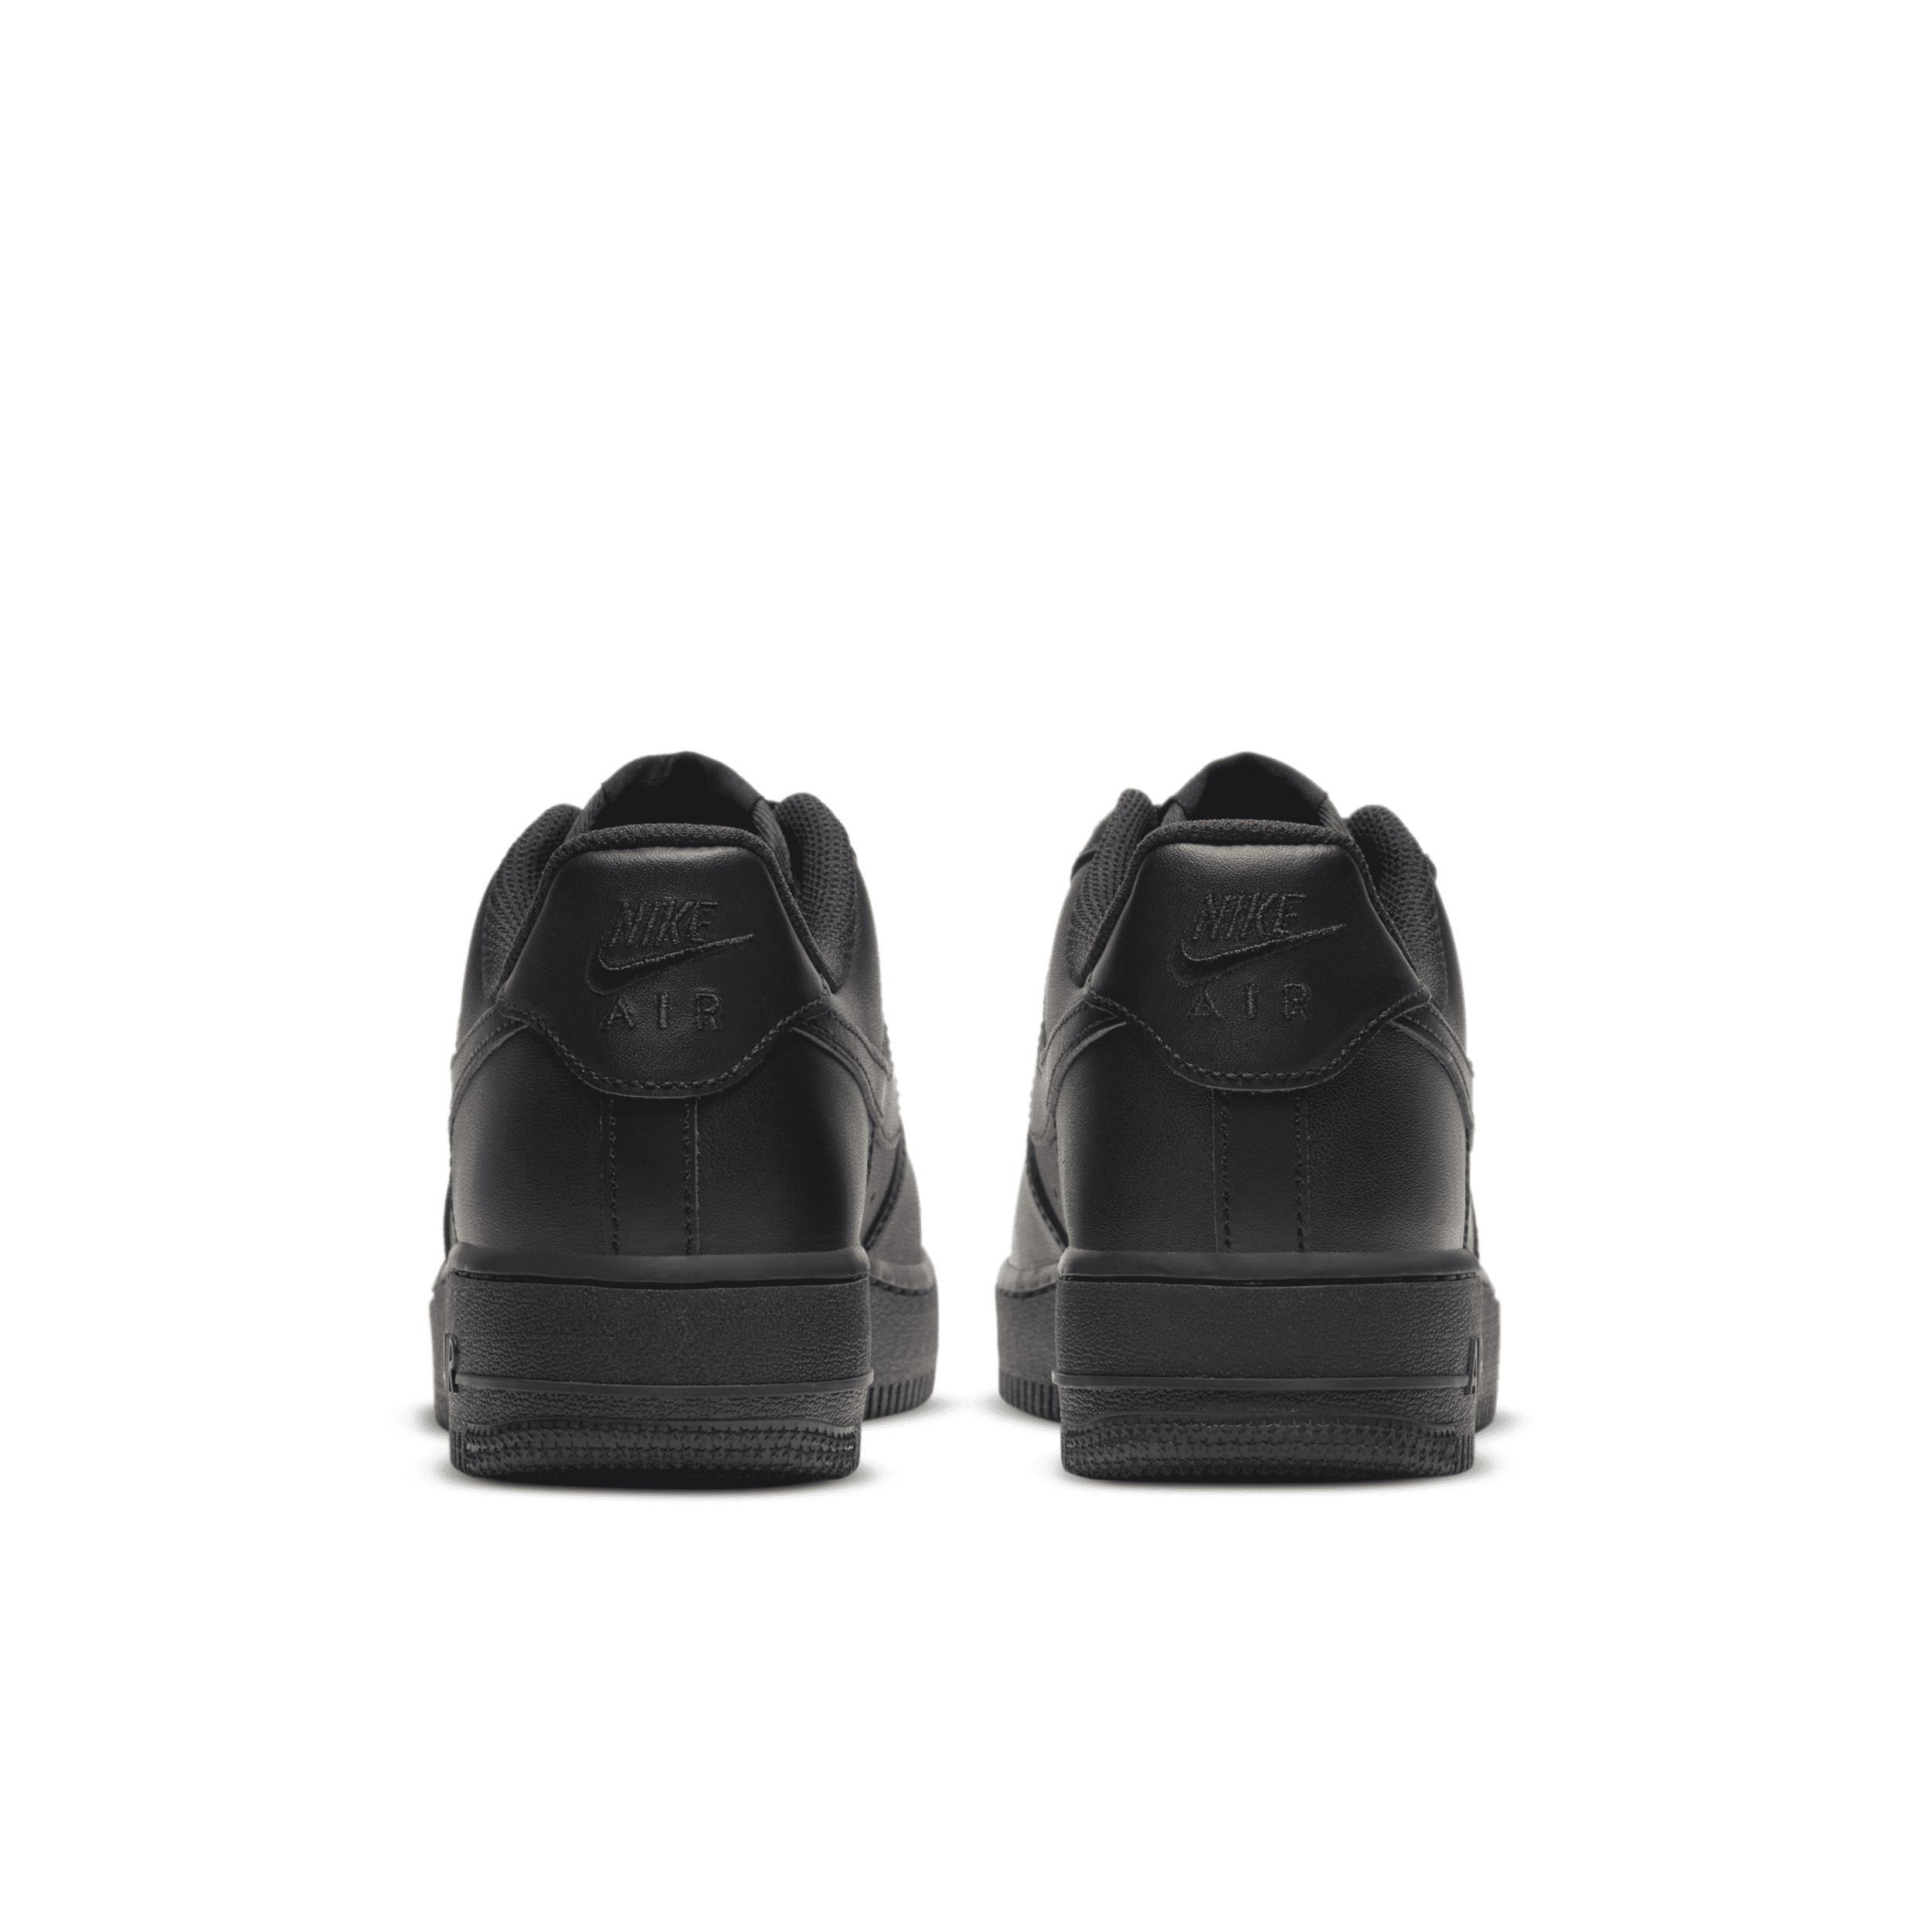 Nike Womens Nike Air Force 1 07 LE Low - Womens Basketball Shoes Black/Black Product Image